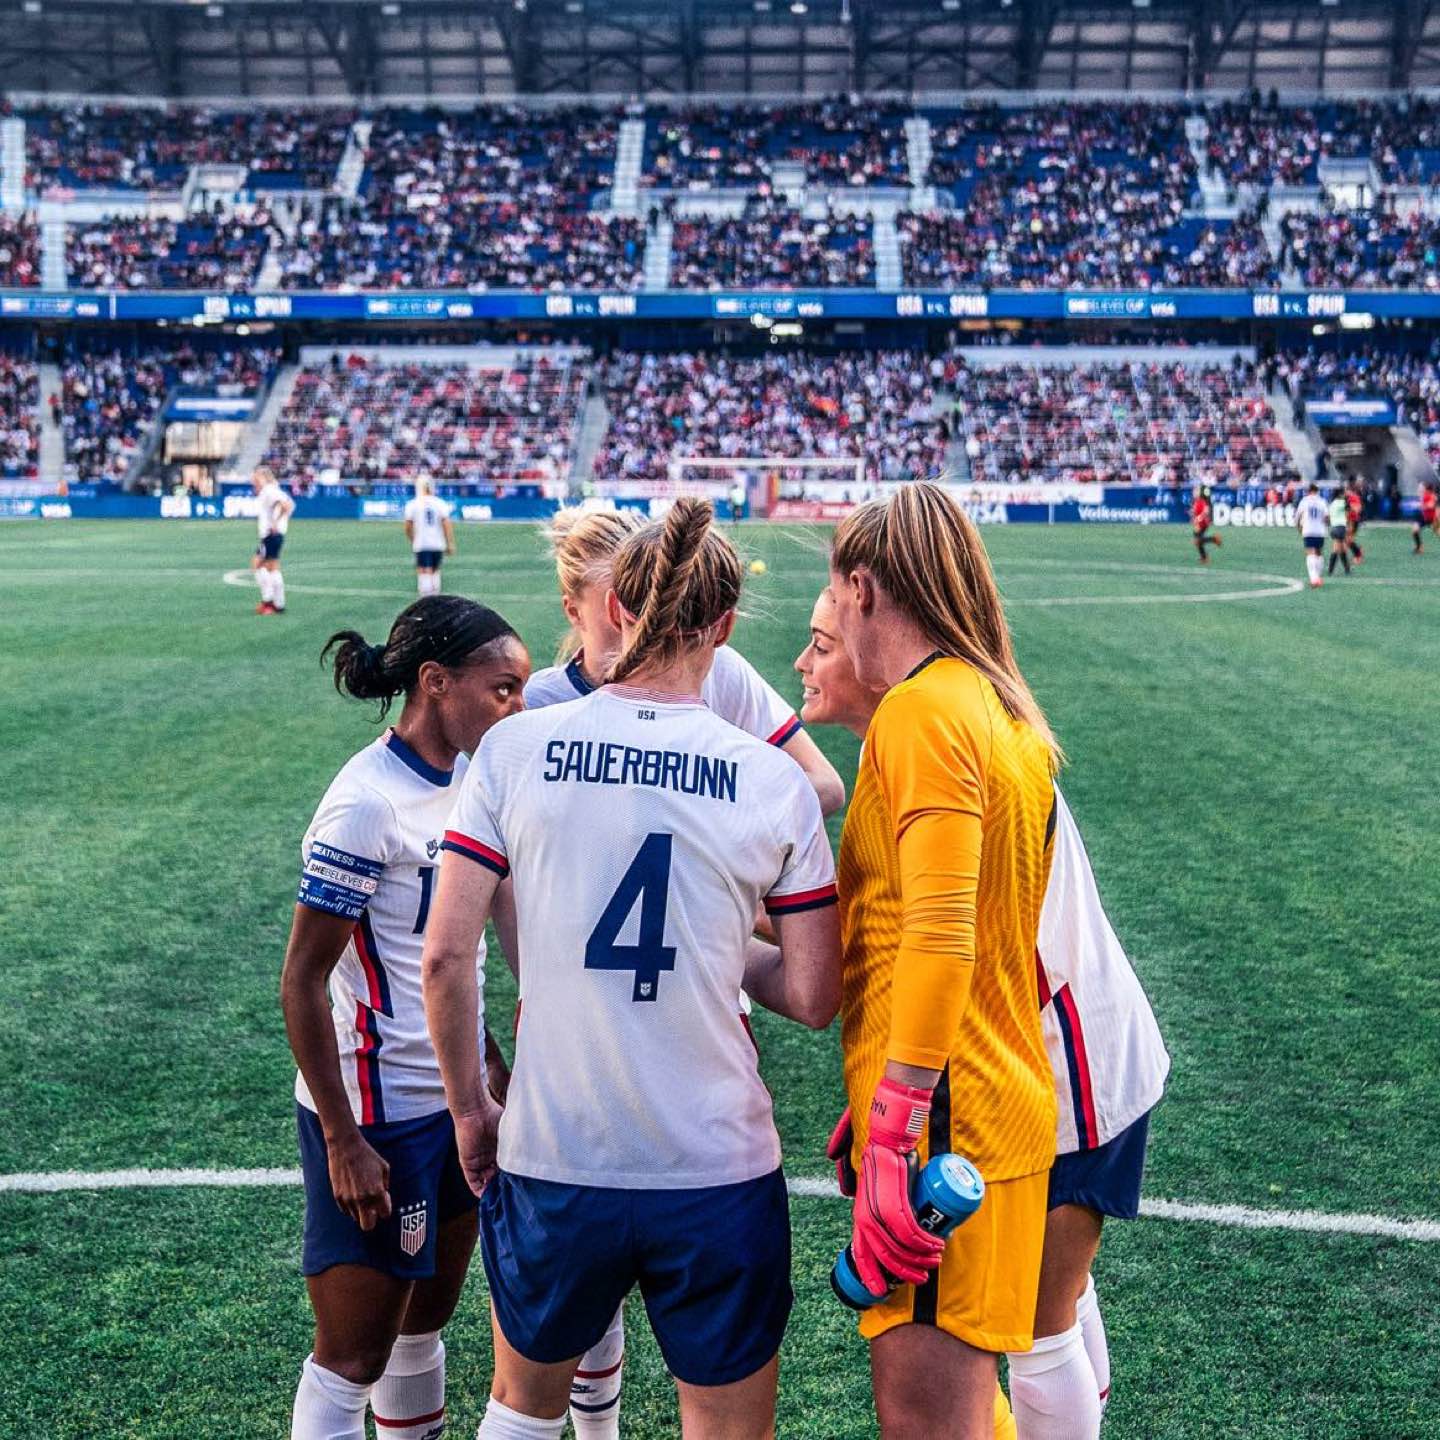 QUIZ: Name the USWNT’s Most Common Opponents